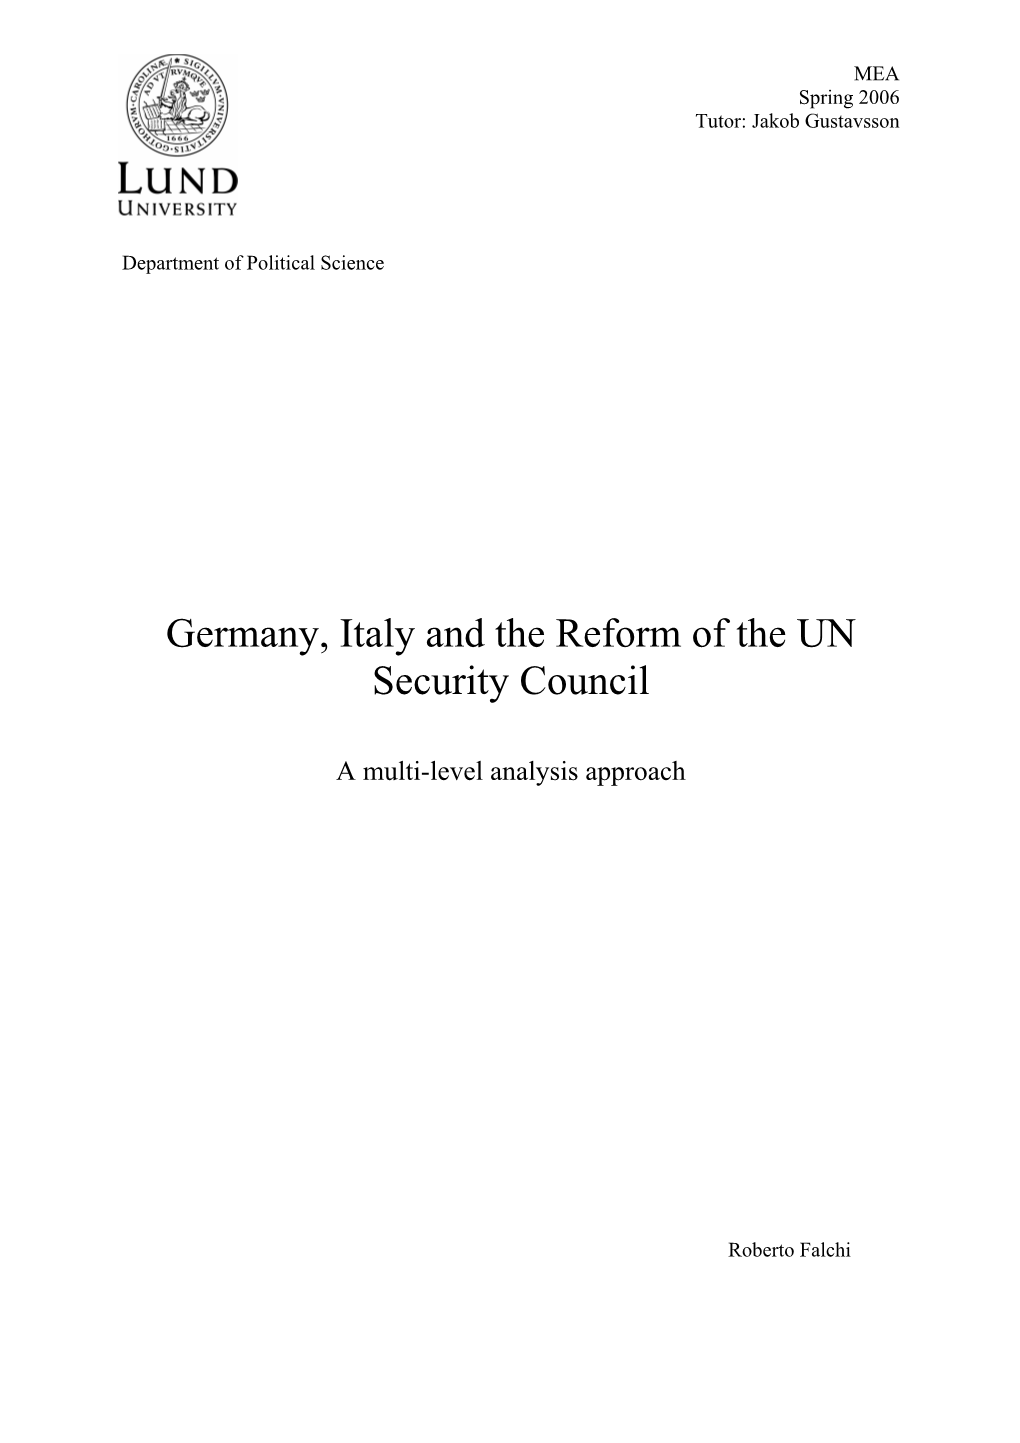 Germany, Italy and the Reform of the UN Security Council